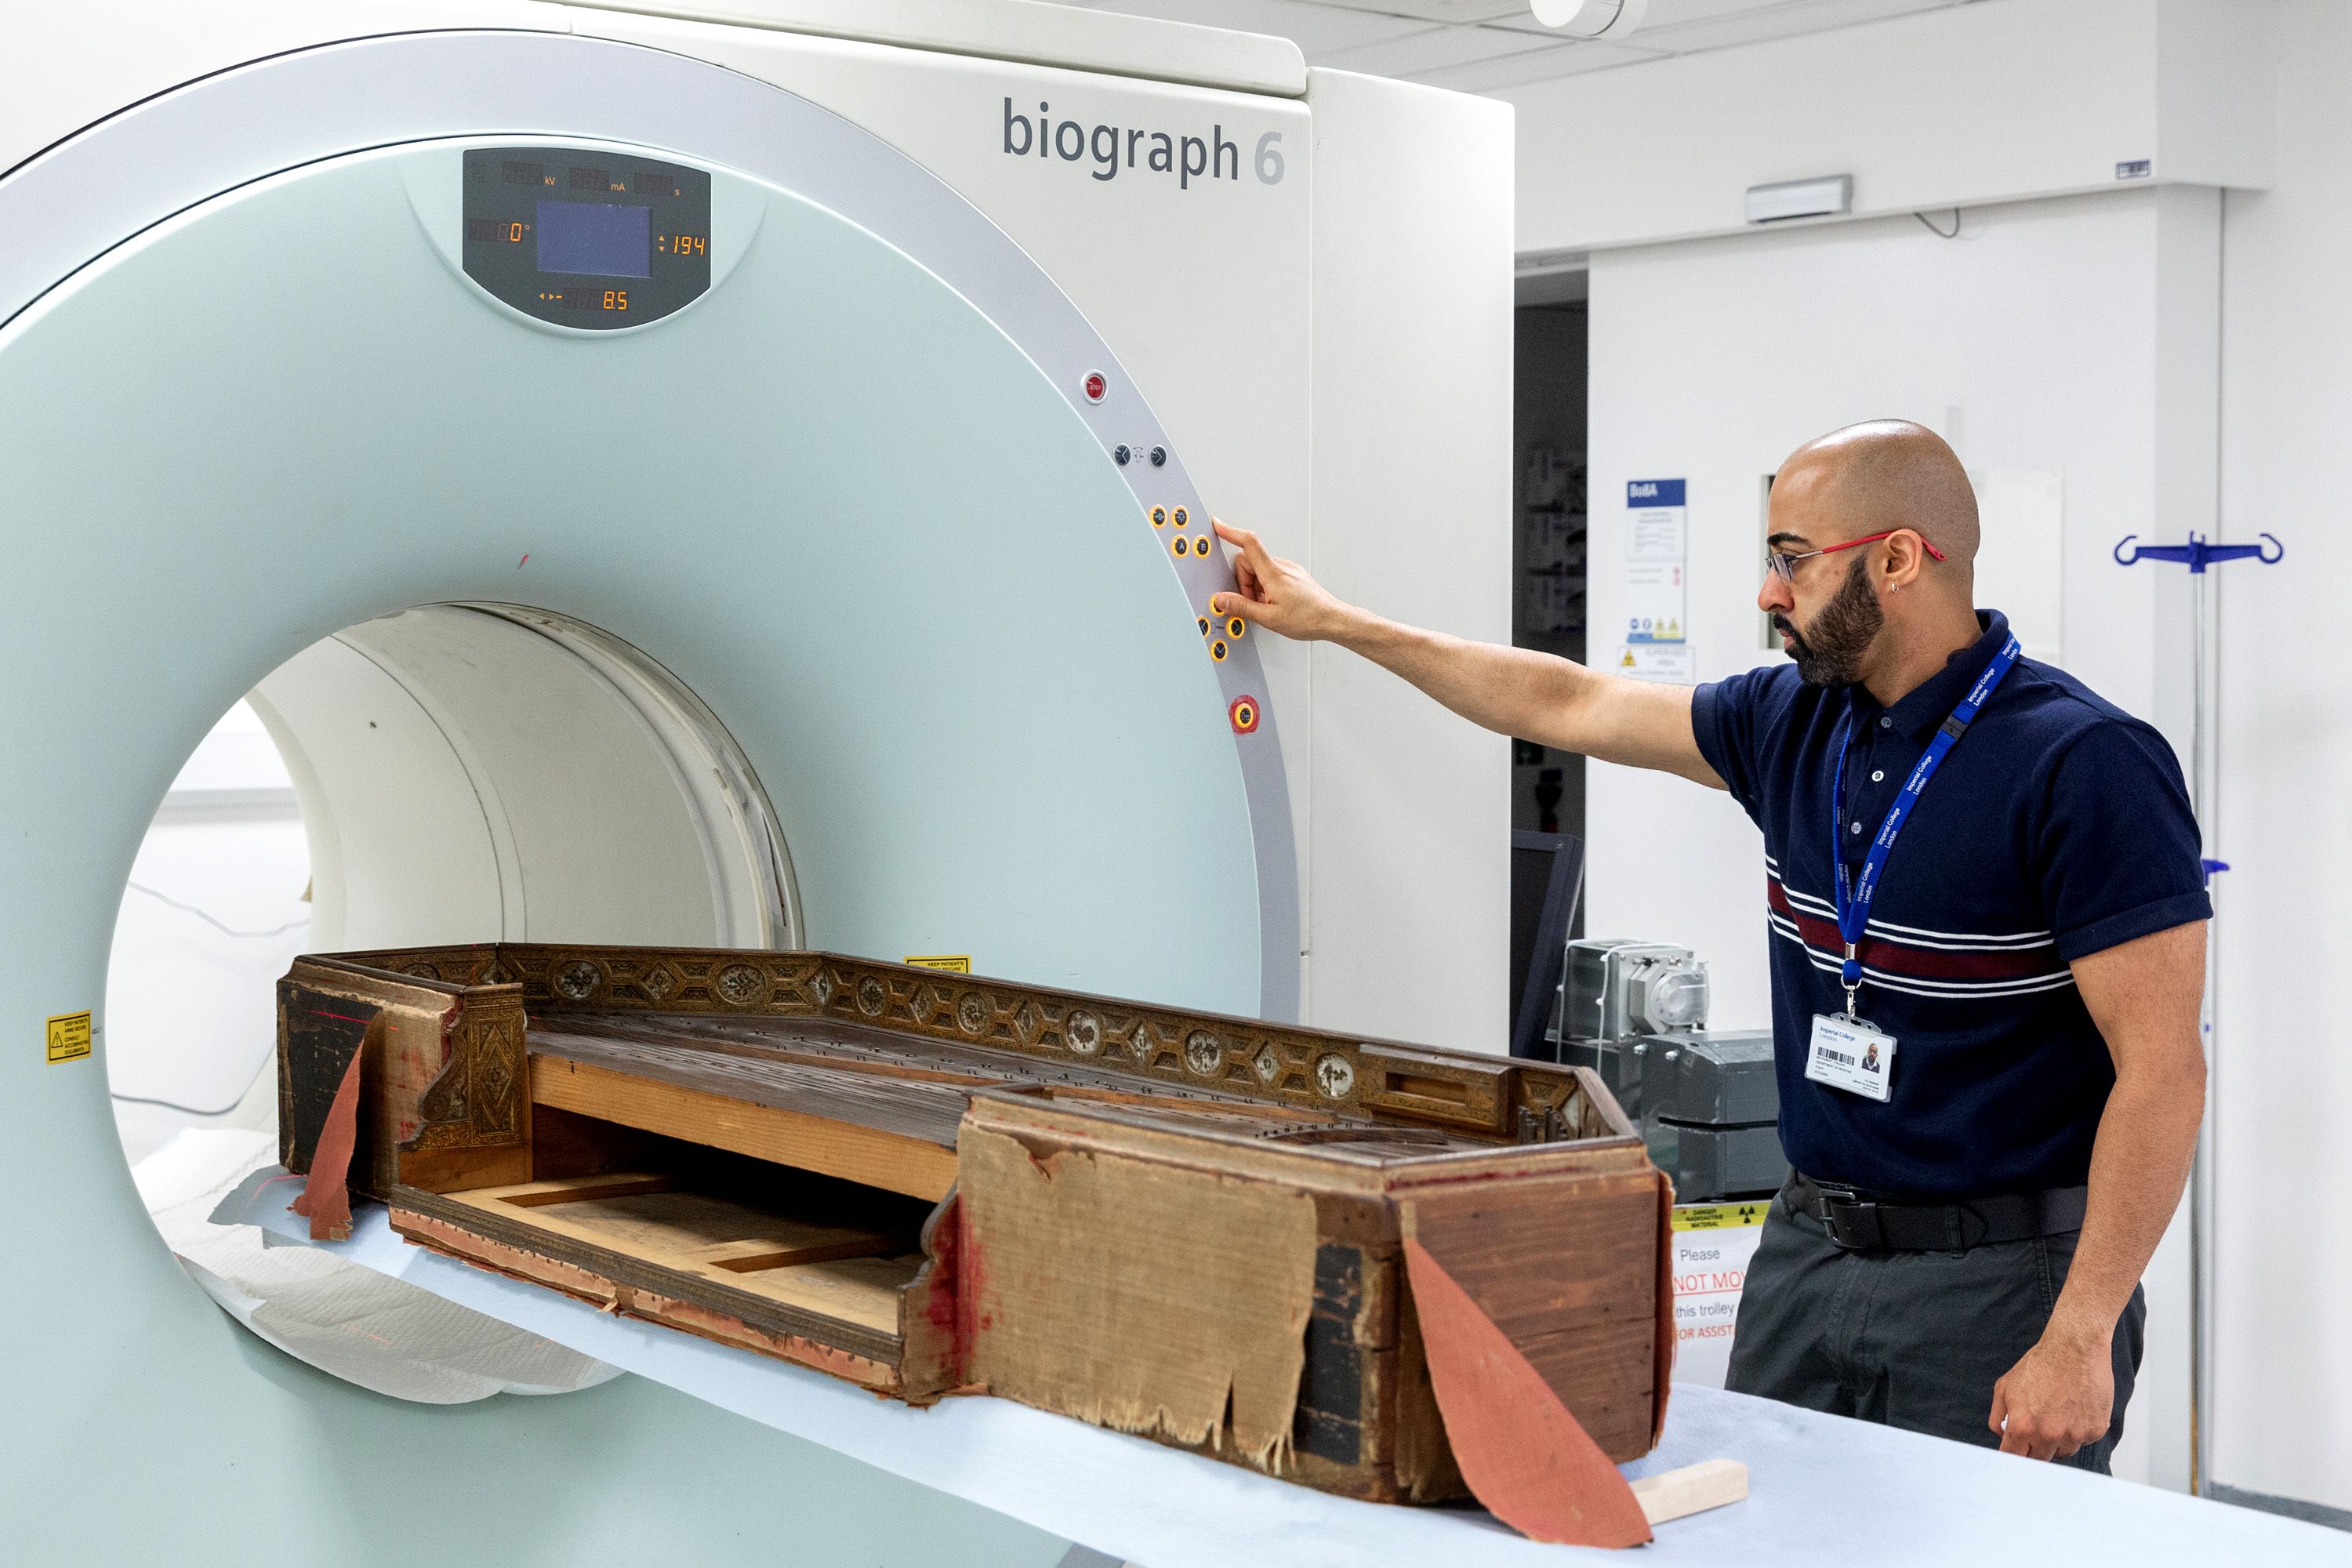 A technician stands over a 16th century harpsichord as it slides into the large white ring of a CT scanner